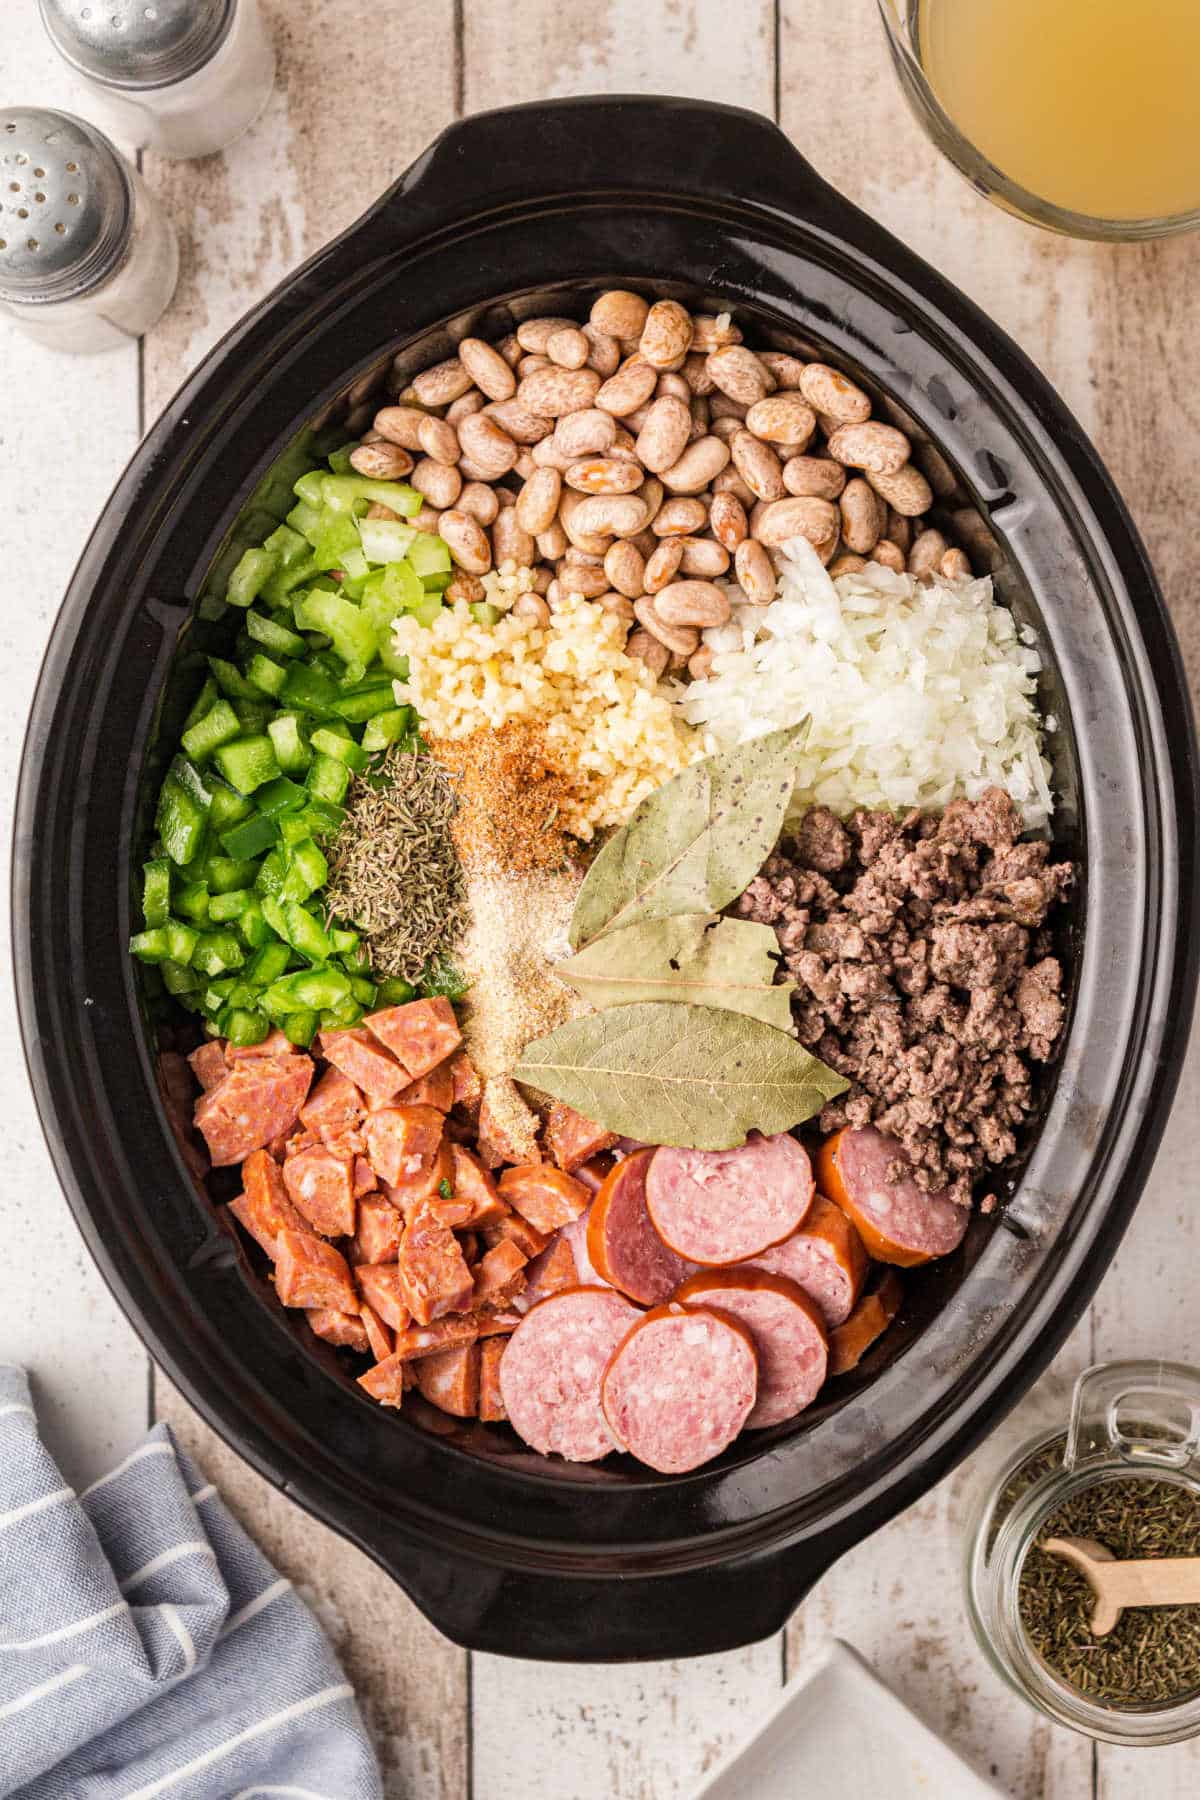 slow cooker filled with the ingredients for some pinto beans